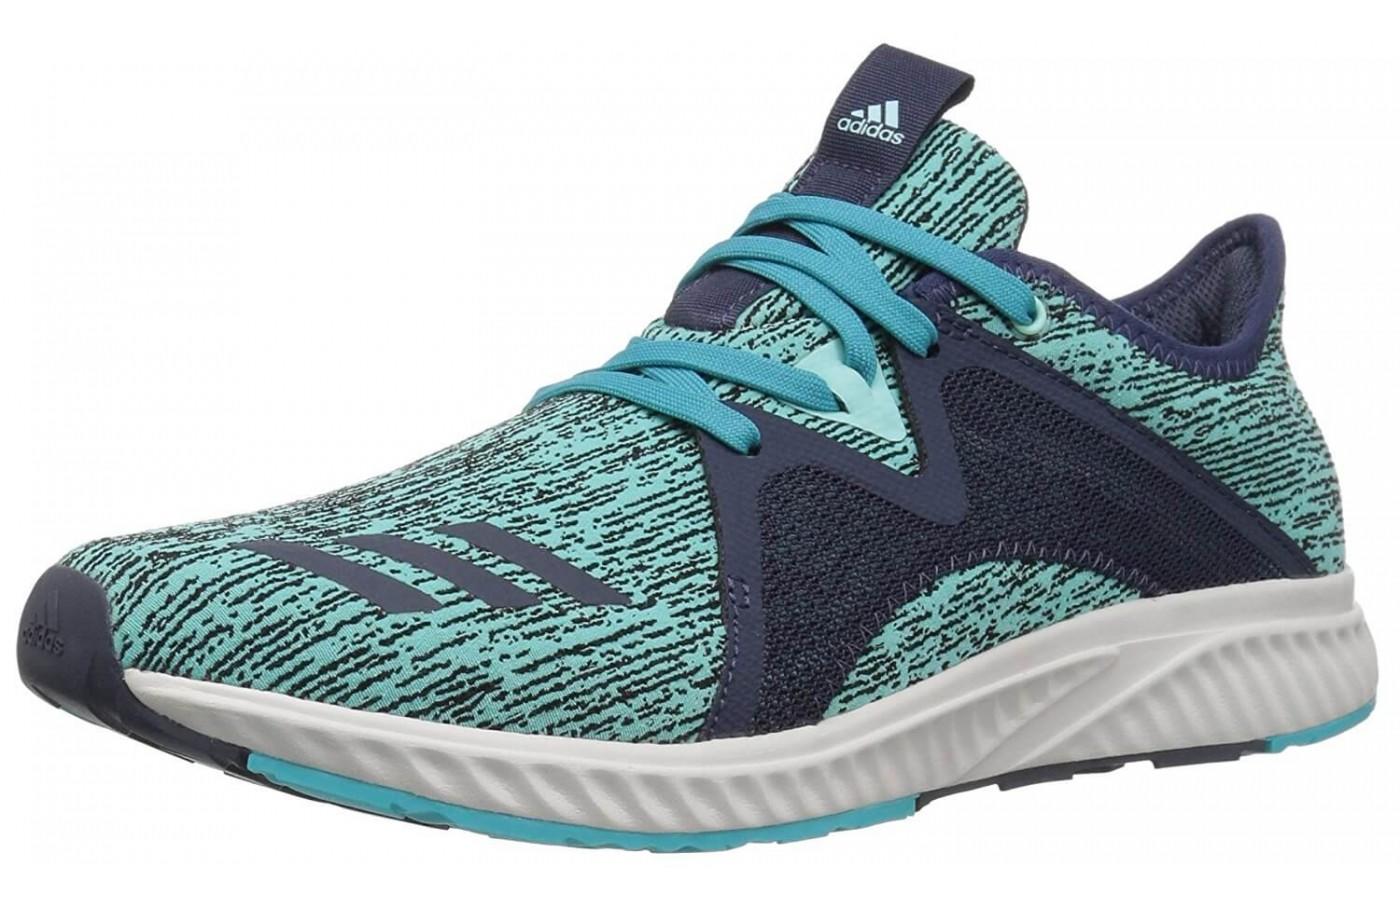 The Adidas Edge Lux 2 is a shoe designed for the fit and needs of a woman